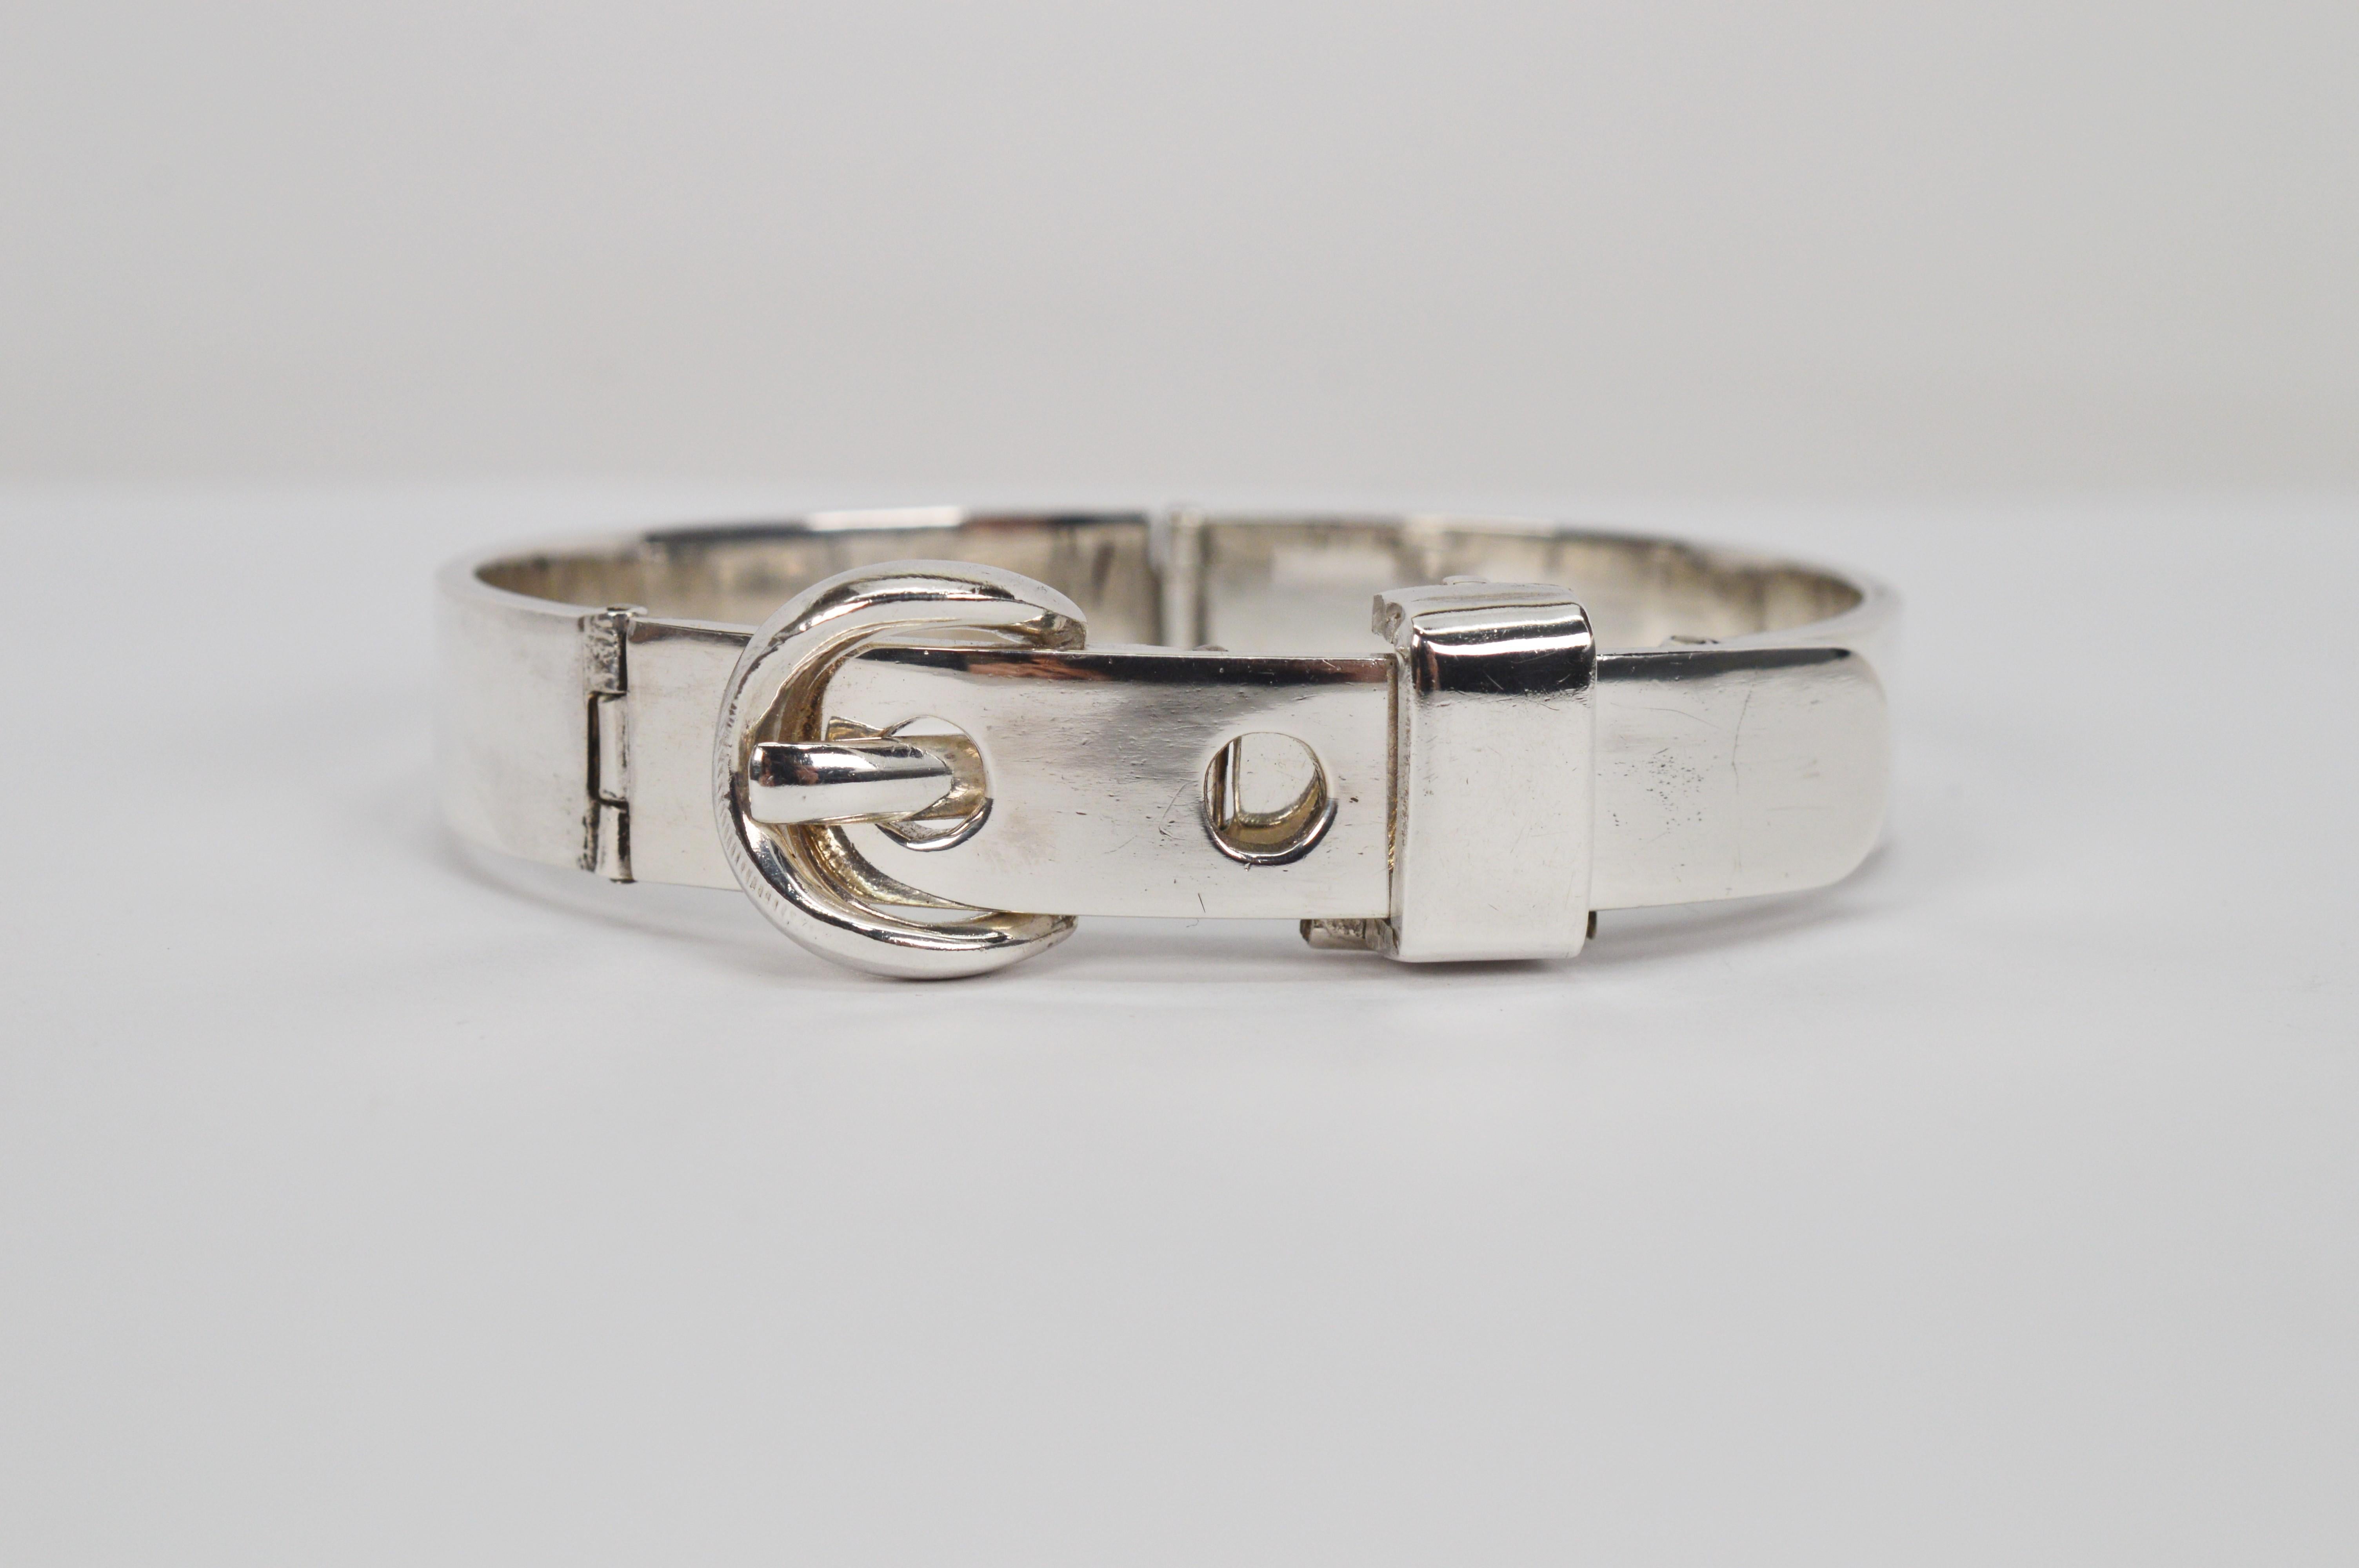 Uniquely designed with a working buckle all in .925 sterling silver. This unusual bracelet is a fabulous retro piece to add to any silver lovers collection. This interesting cuff in heavy gauge sterling is constructed with four moving hinged